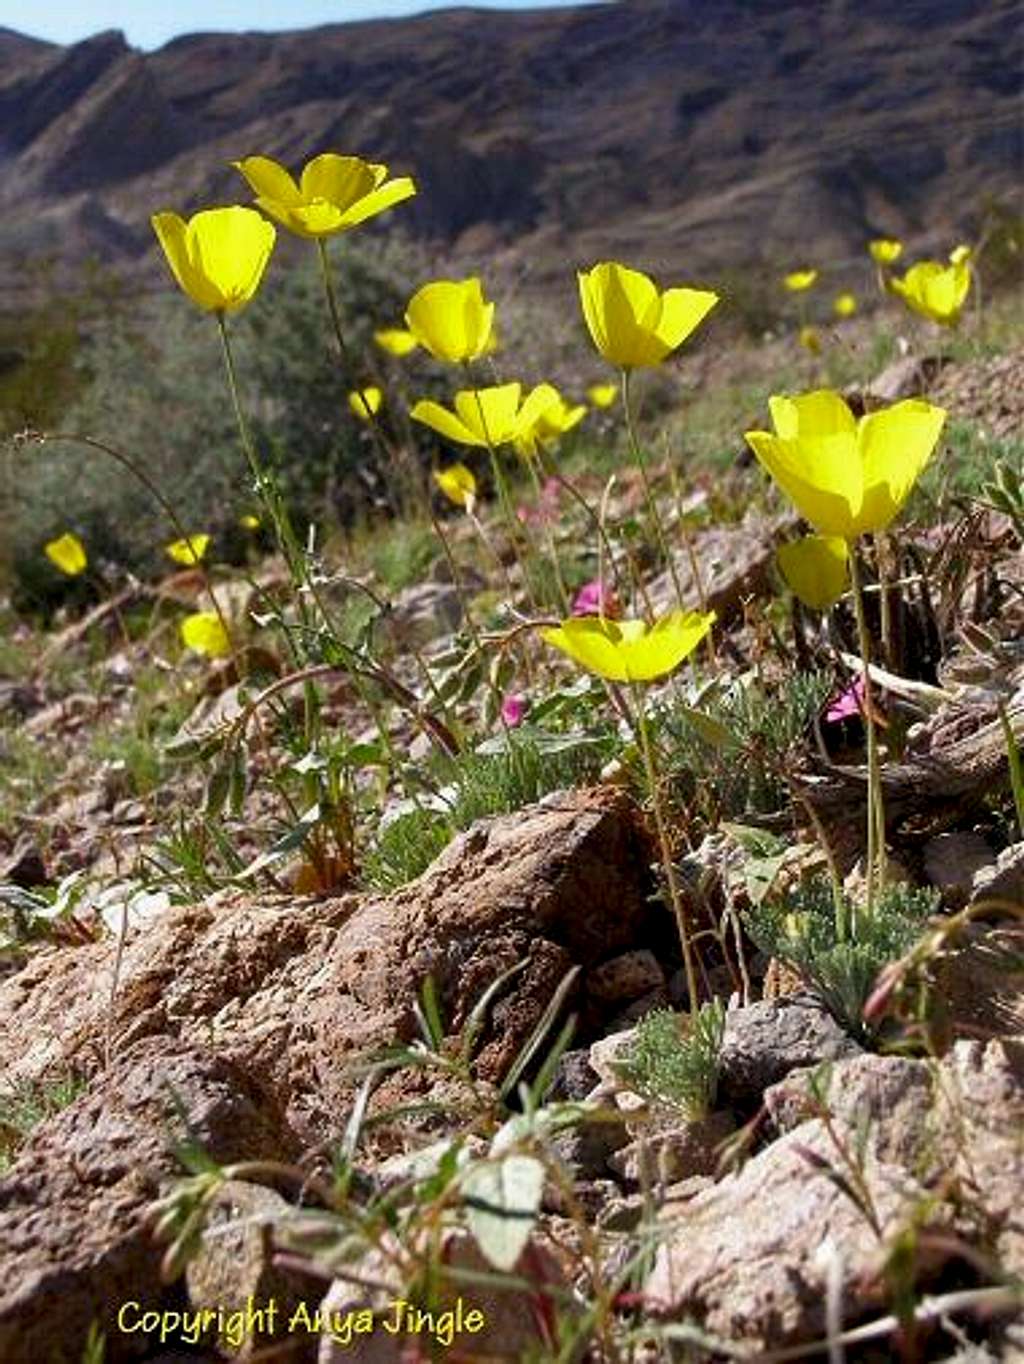 Mojave Gold Poppies